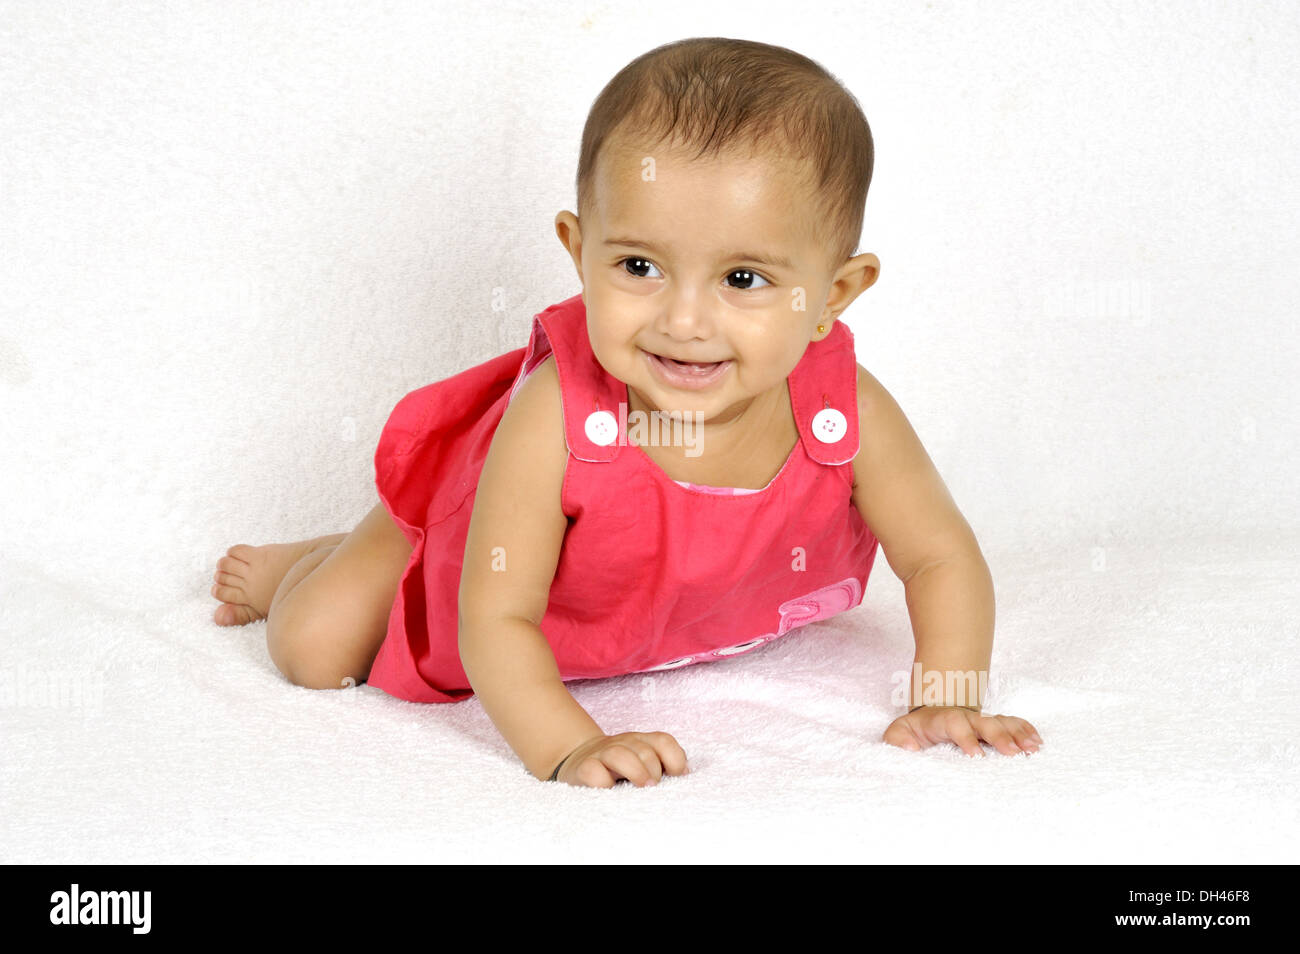 Indian Baby Crawling on White Background - Model Released # 736LA Stock Photo